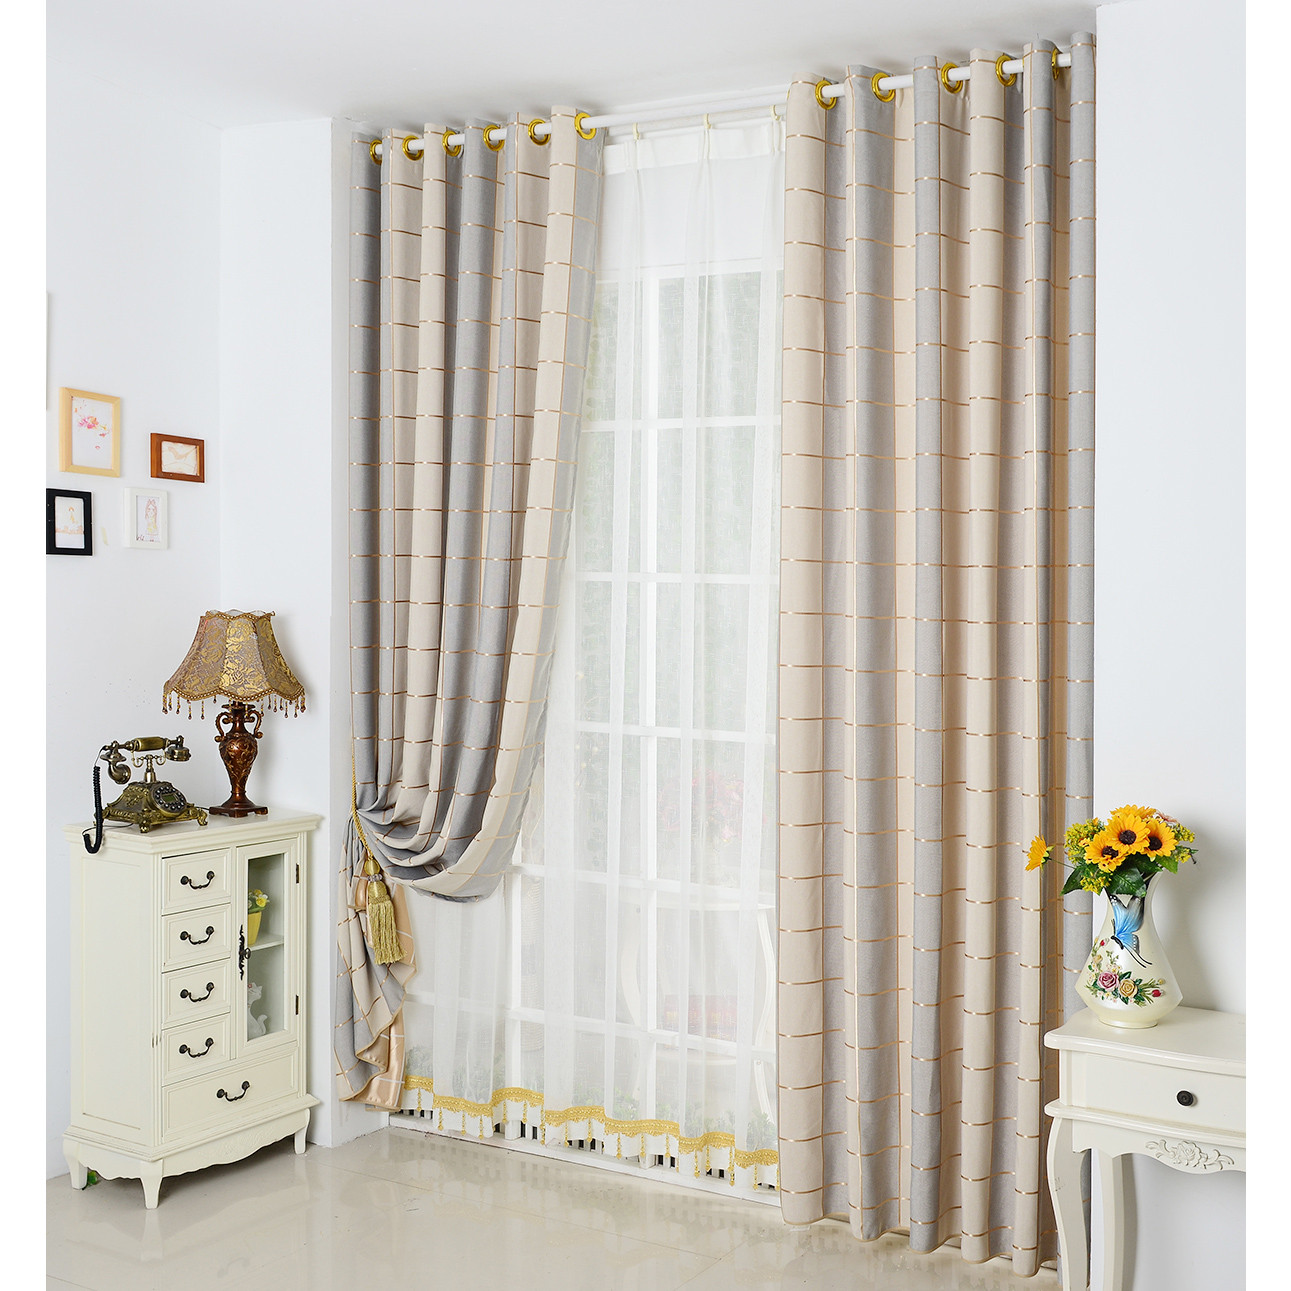 Plaid Kitchen Curtains
 Decorating Decorate Your Lovely Window With Fabulous